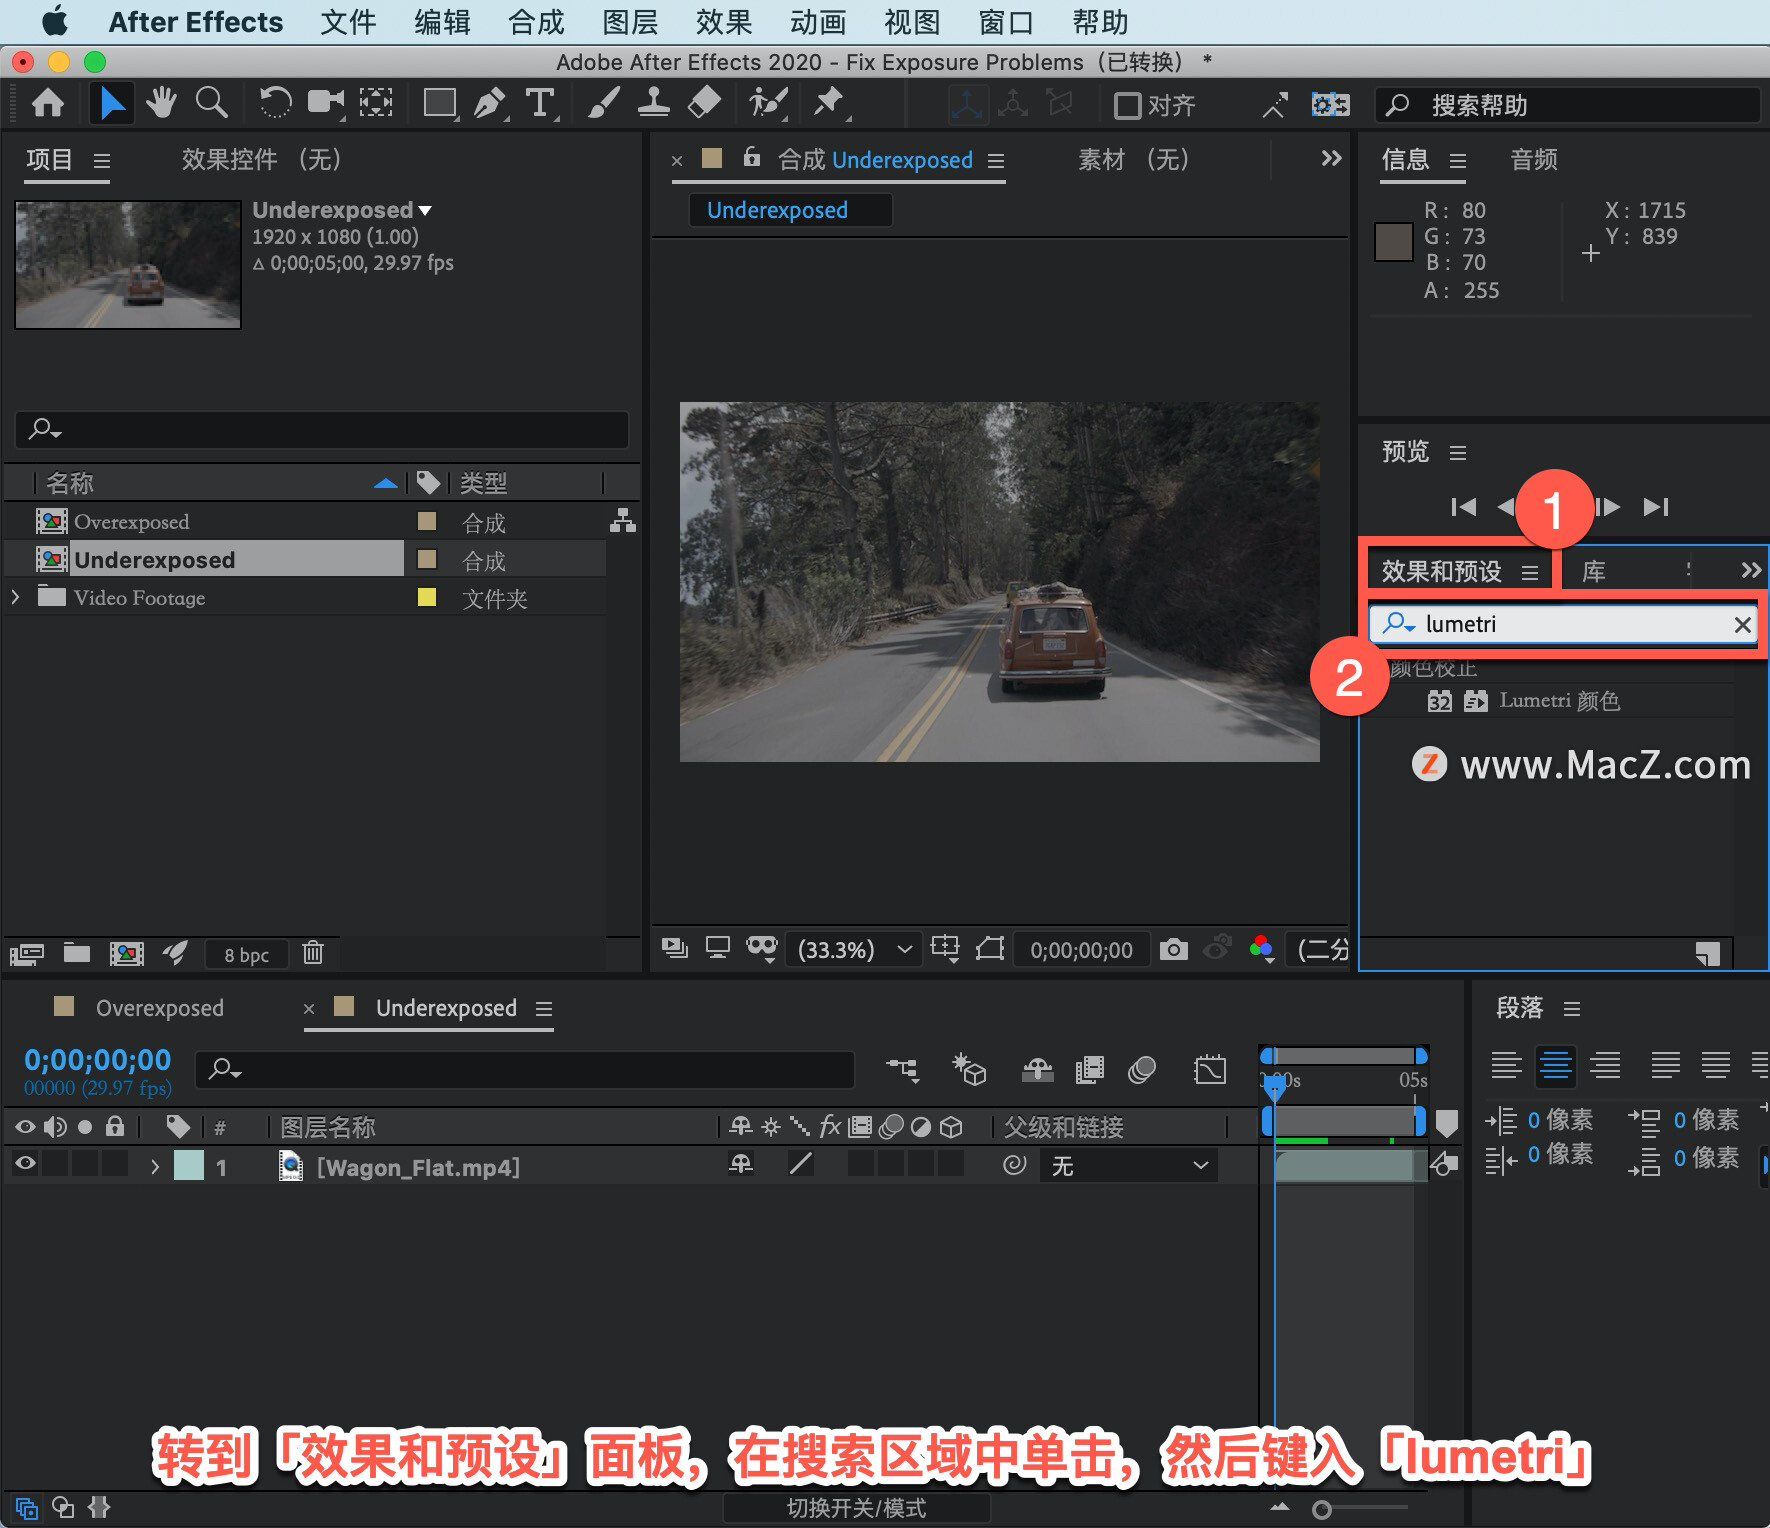 After Effects 教程「21」，如何在 After Effects 中修复曝光不足的镜头？